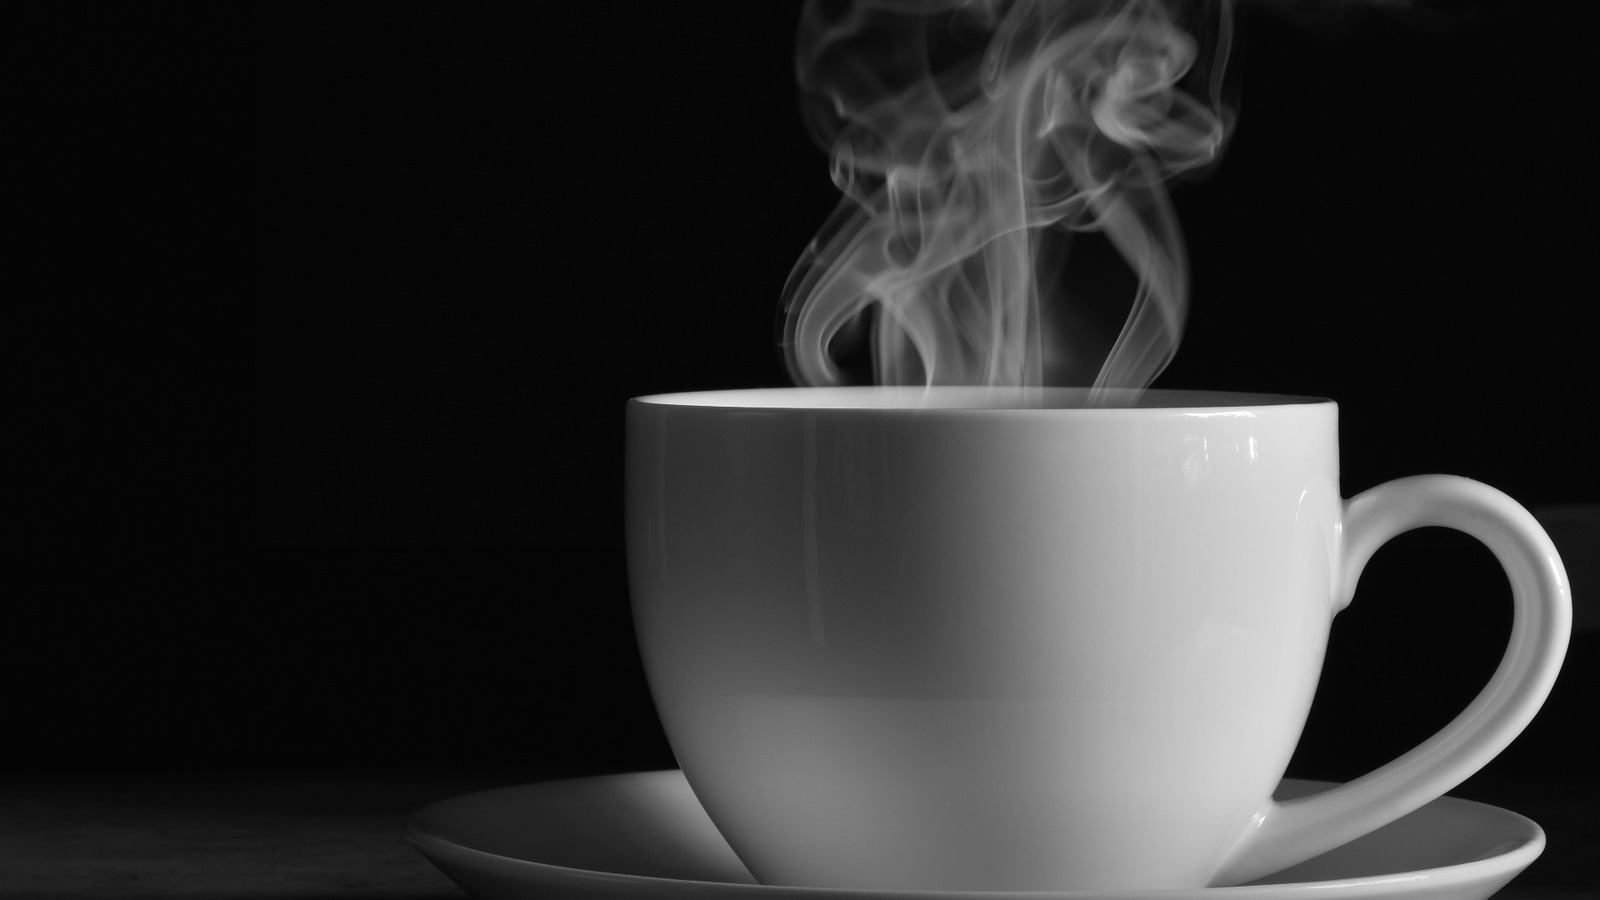 Here's How You Should Cool Down Hot Coffee, According To Science